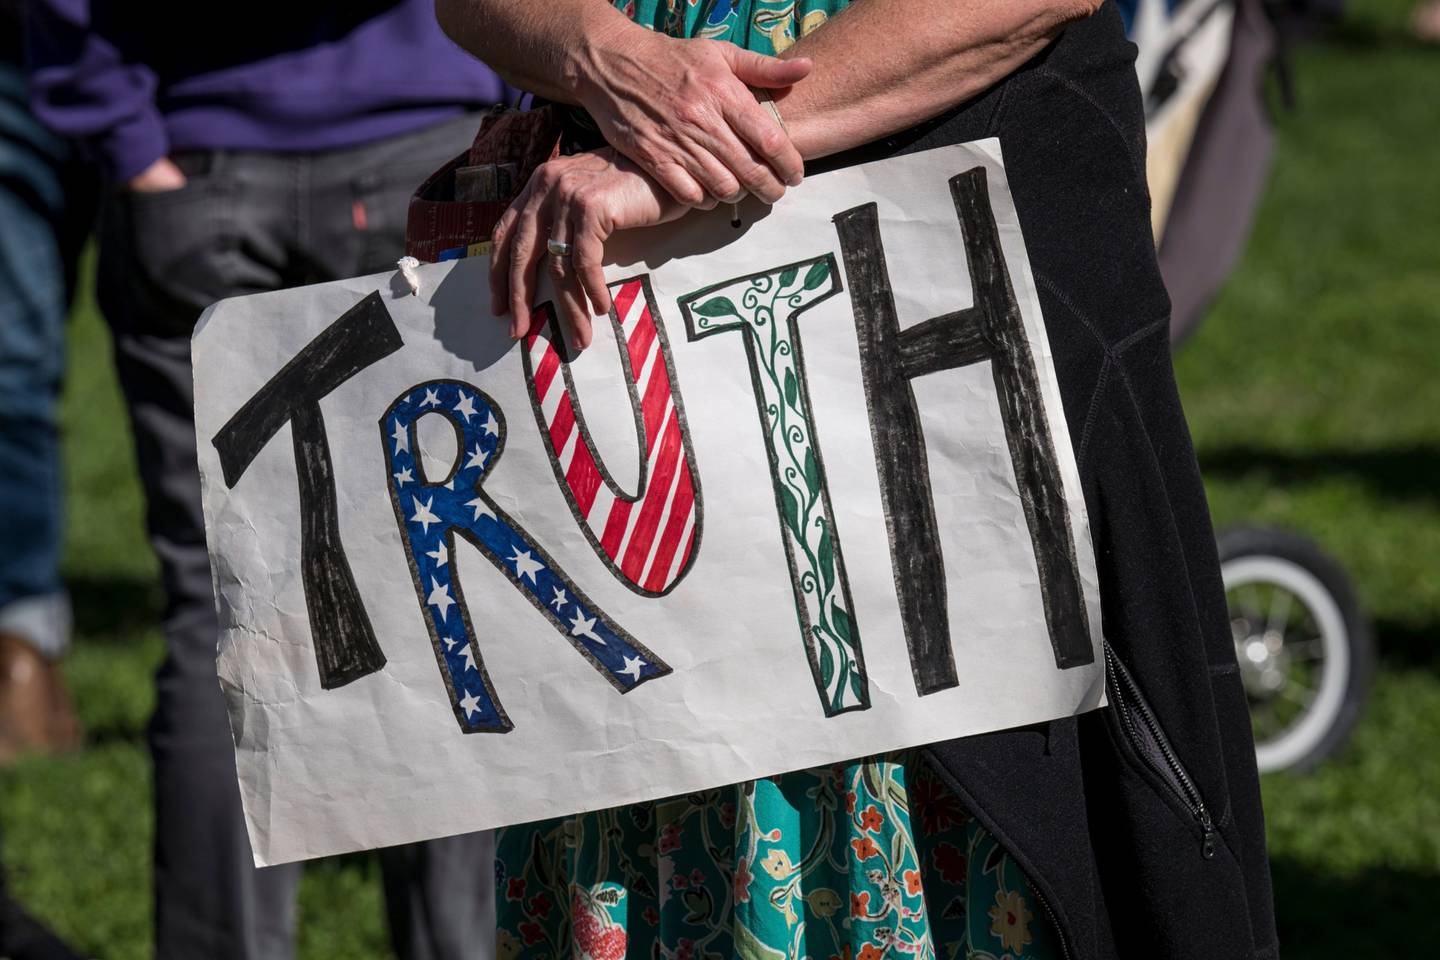 A demonstrator holds a sign reading "Truth" at a protest.